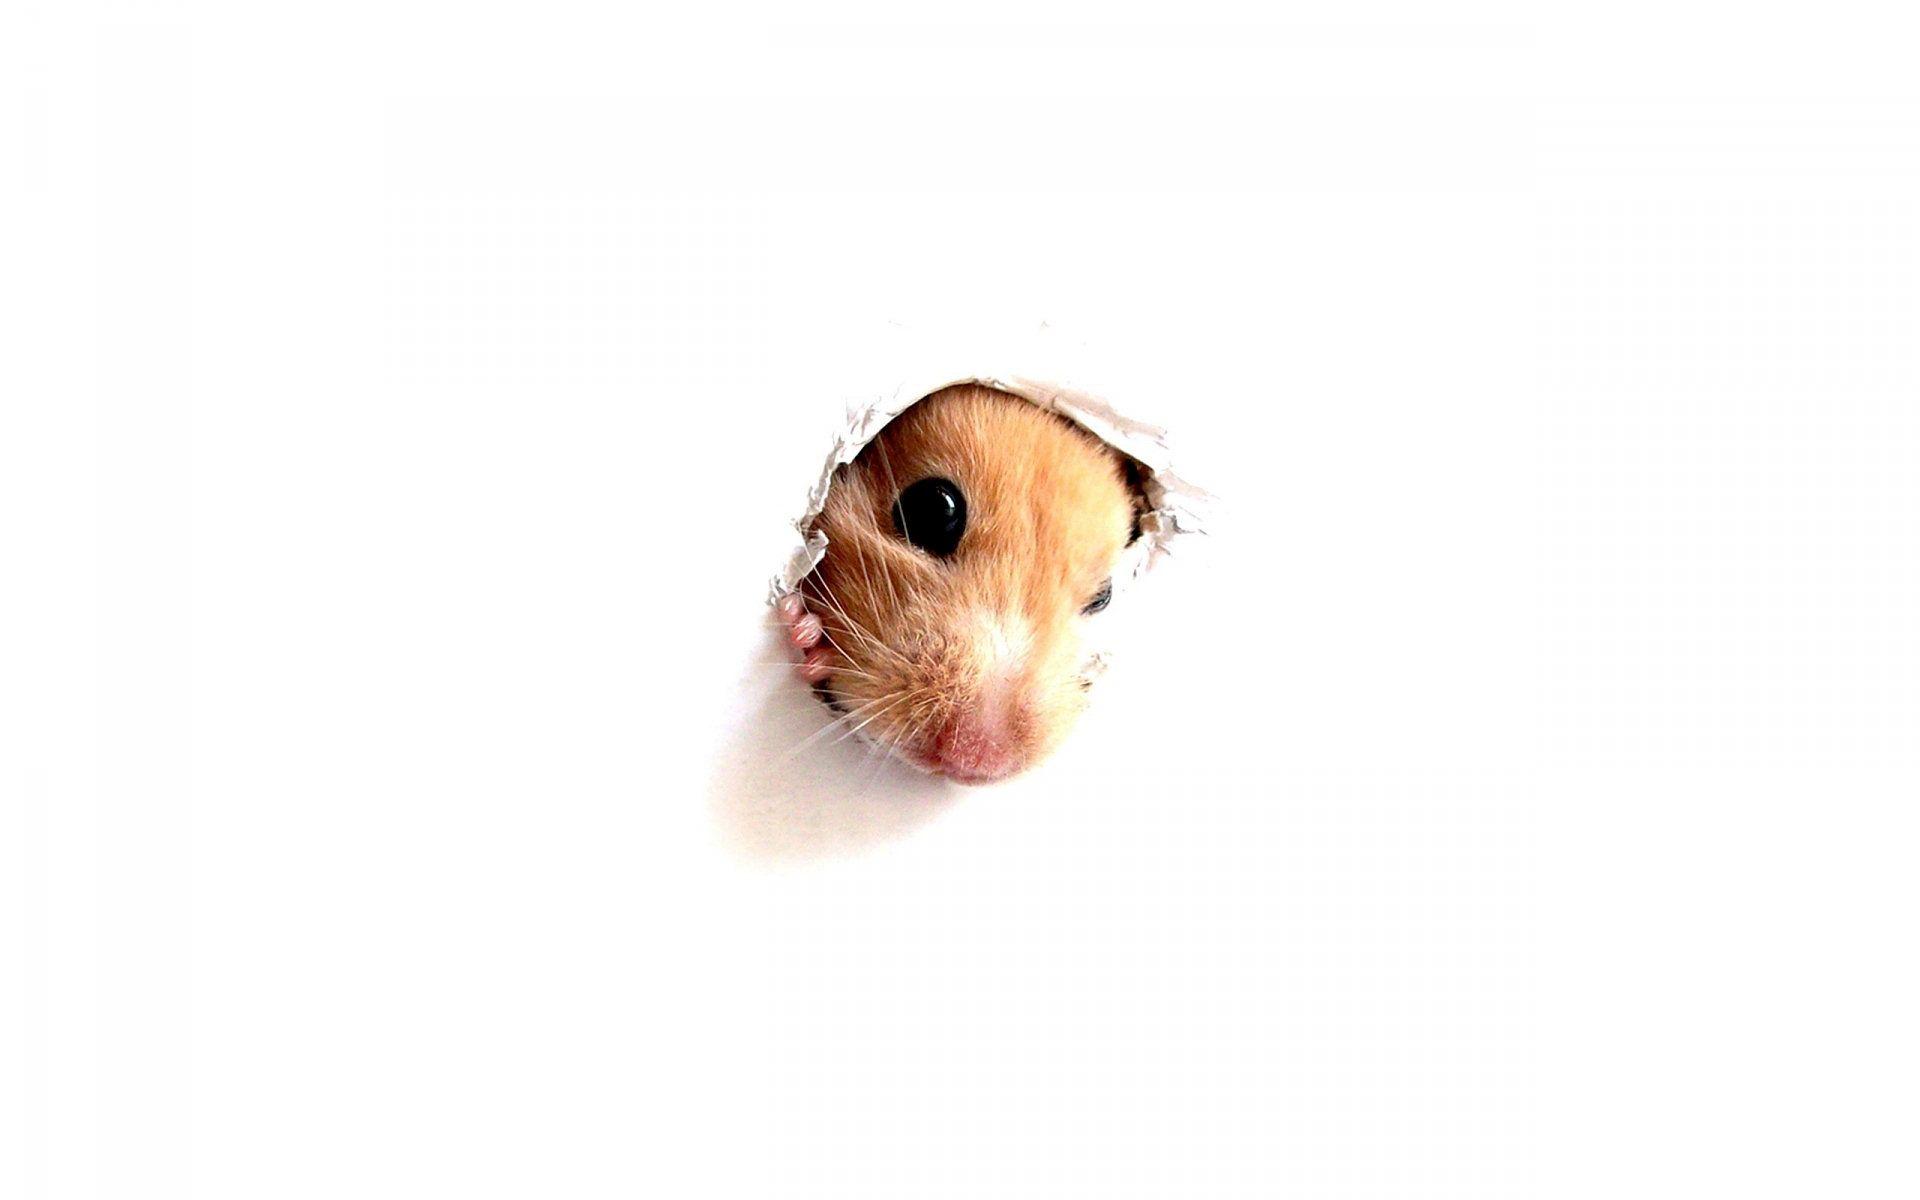 Hamster Quality HD Wallpaper, G.sFDcY